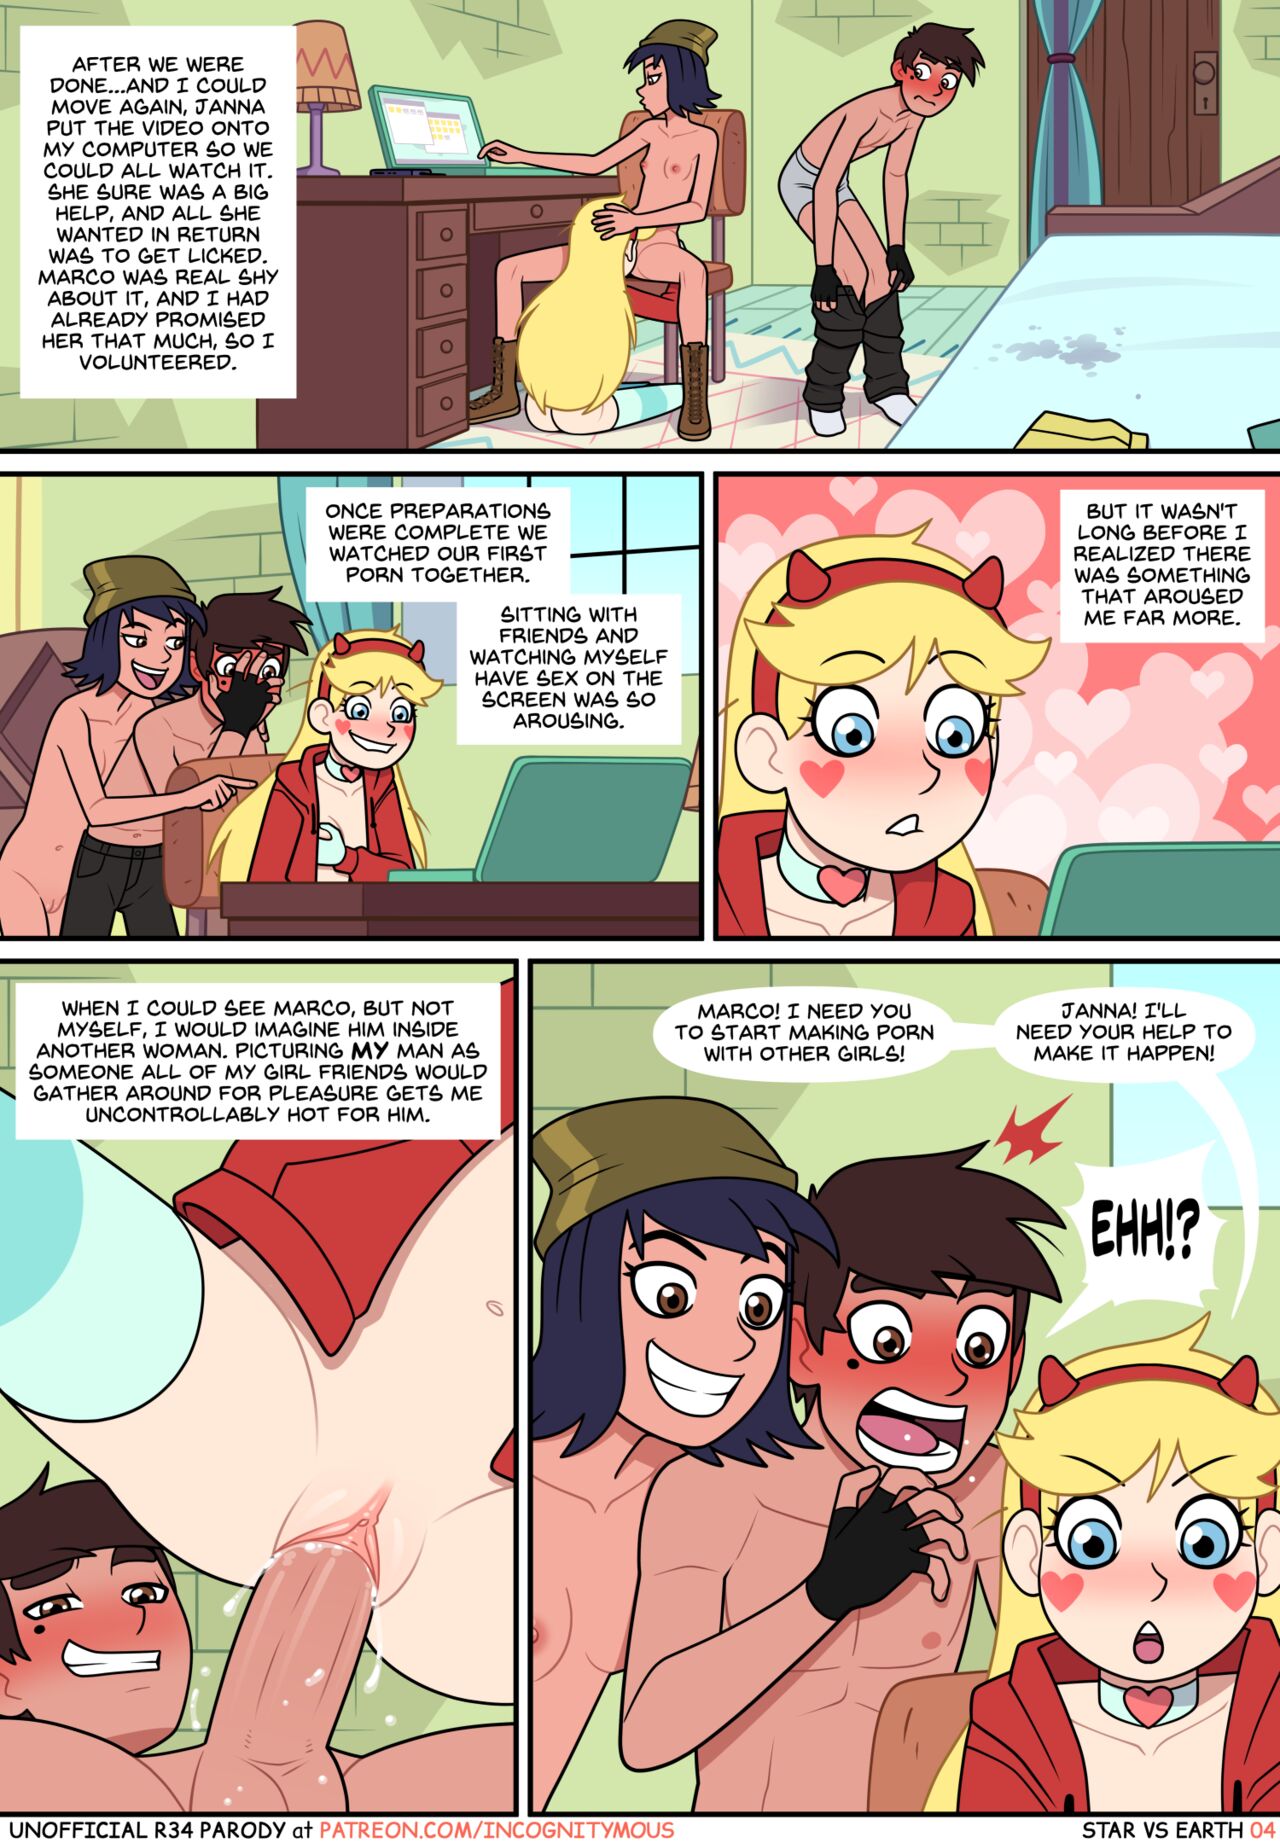 Star Vs Earth – Incognitymous 4